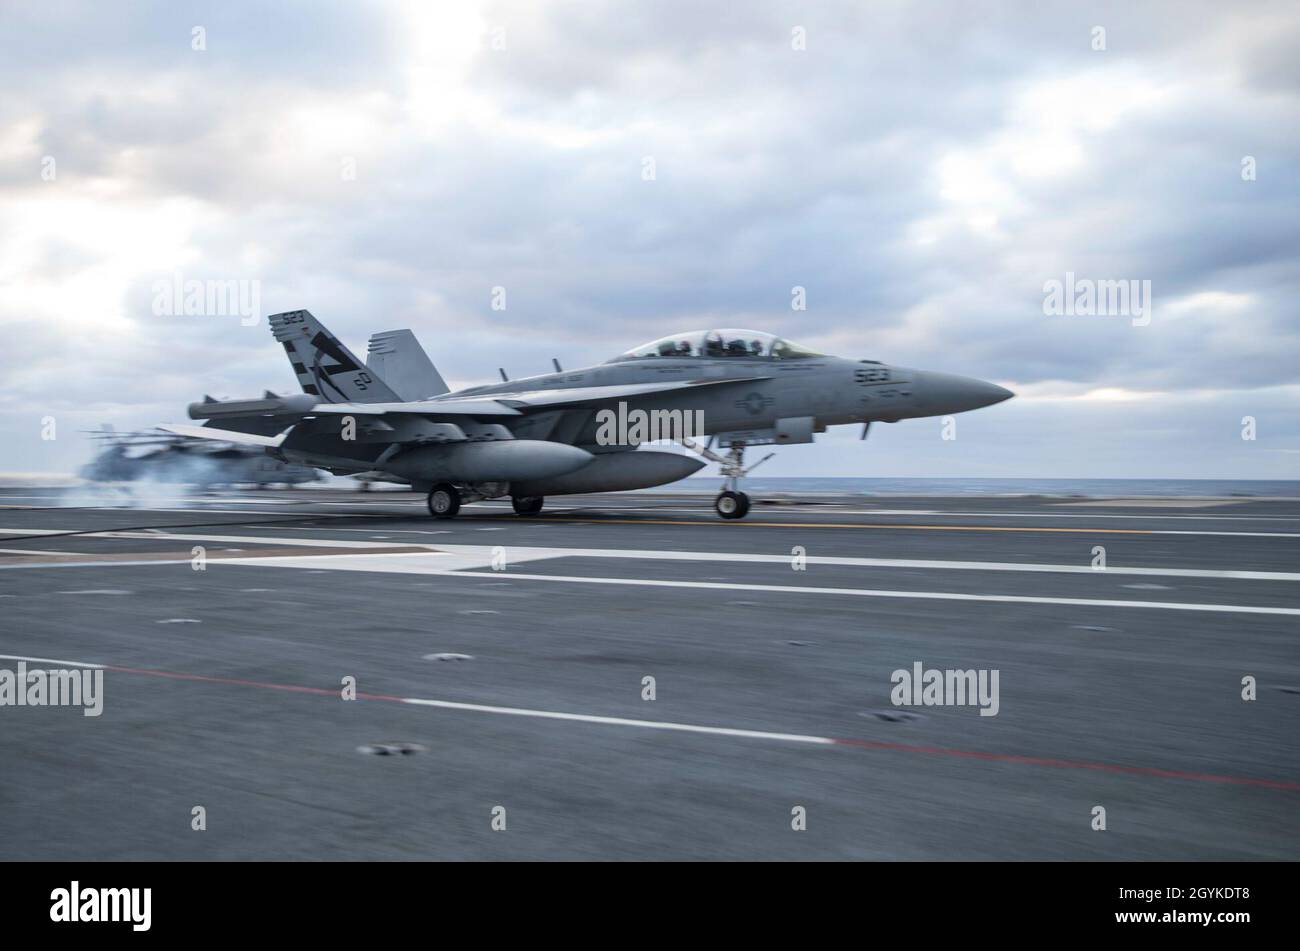 ATLANTIC OCEAN (Jan. 17, 2020) An EA-18G Growler, assigned to Air Test and Evaluation Squadron (VX) 23, approaches USS Gerald R. Ford's (CVN 78) flight deck. Ford is currently conducting Aircraft Compatibility Testing to further test its Electromagnetic Aircraft Launch Systems (EMALS) and Advanced Arresting Gear (AAG). (U.S. Navy photo by Mass Communication Specialist Seaman Zack Guth) Stock Photo